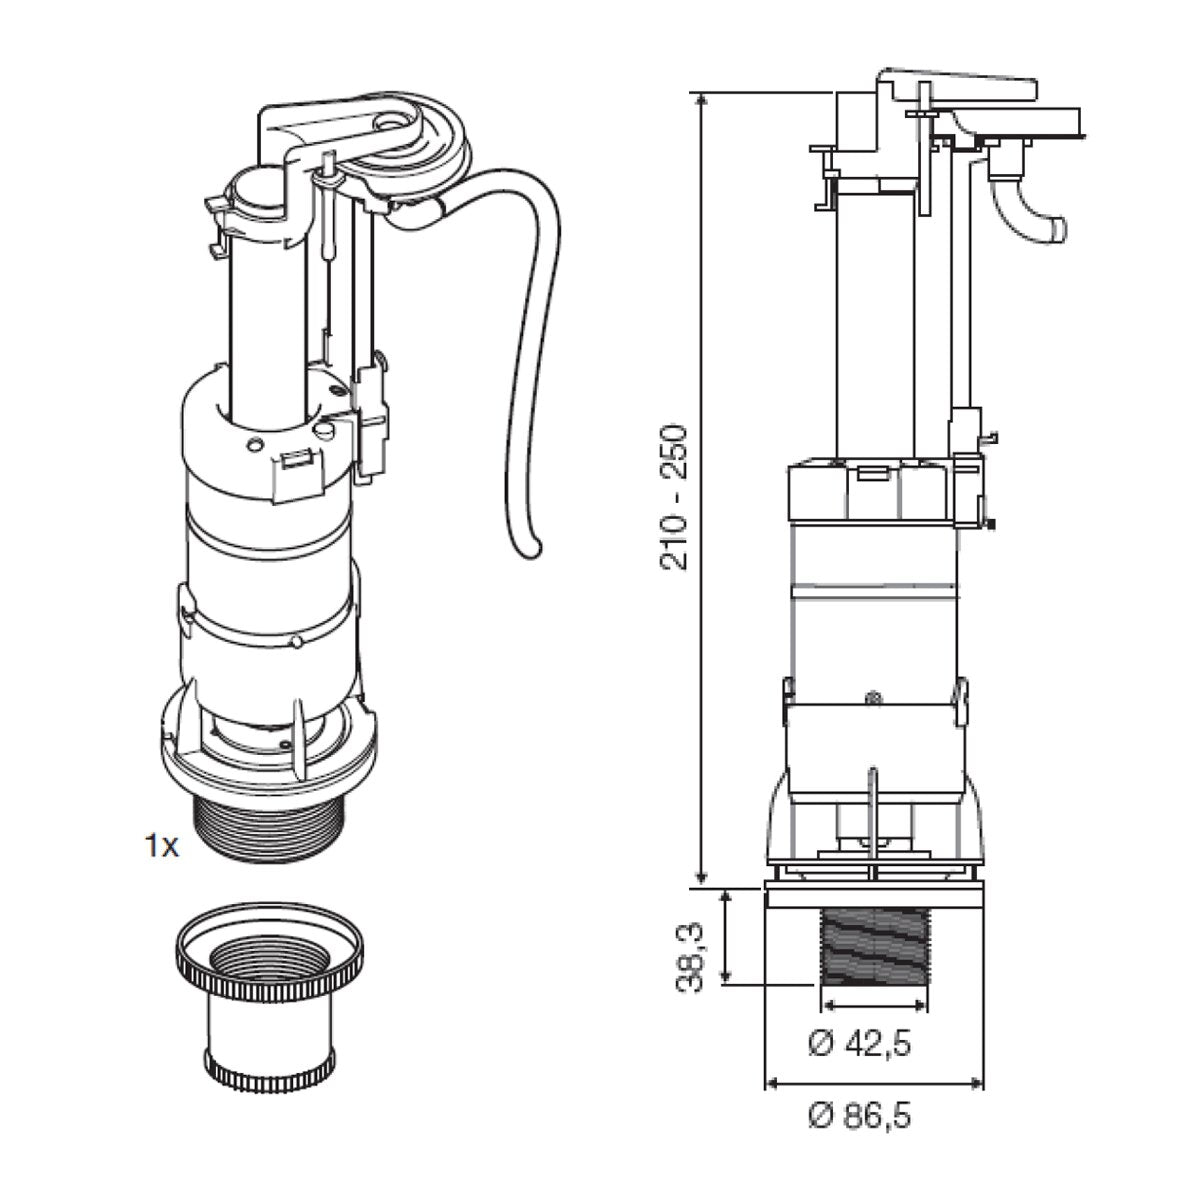 Universal Replace OIL drain valve for tall cassettes